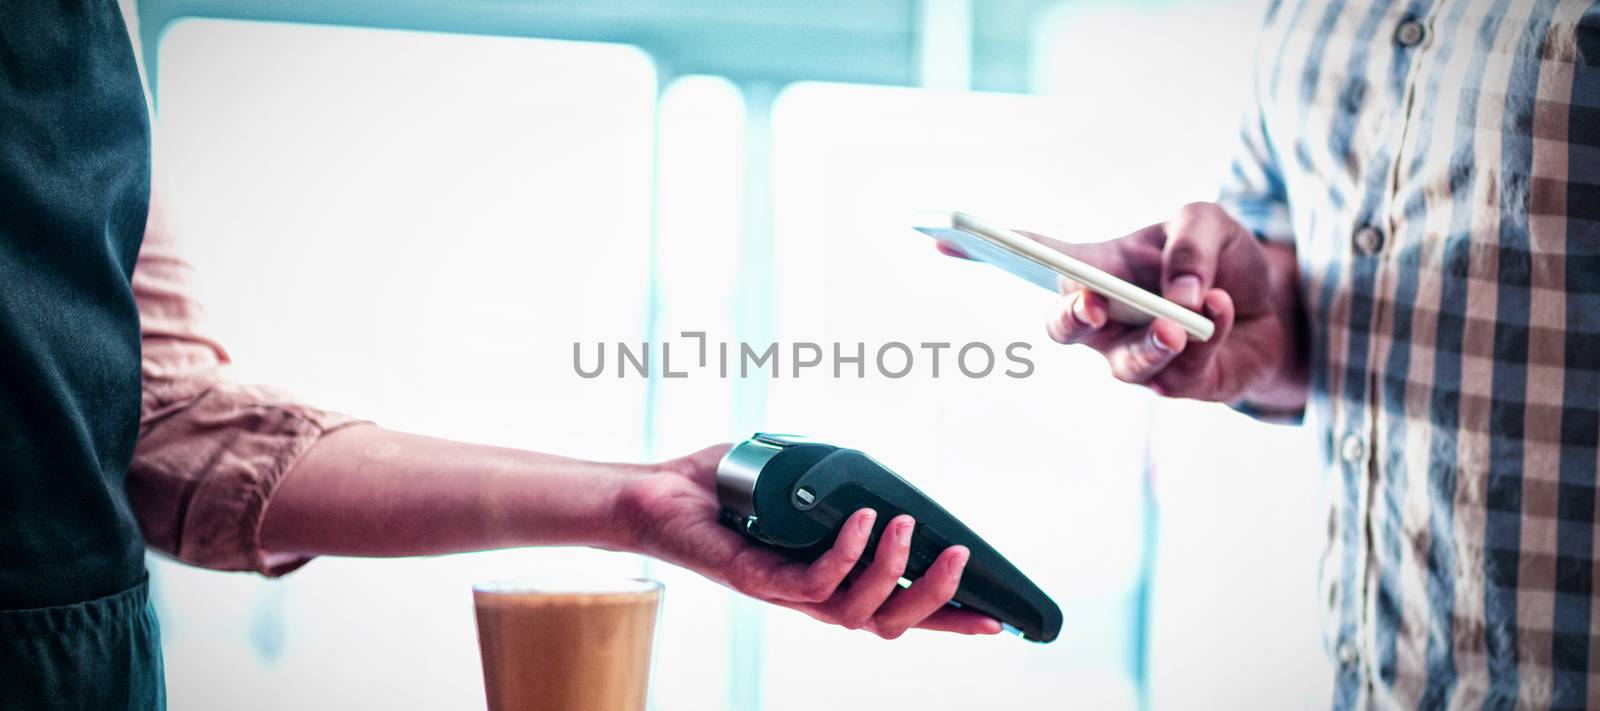 Man making payment through NFC technology in cafe by Wavebreakmedia